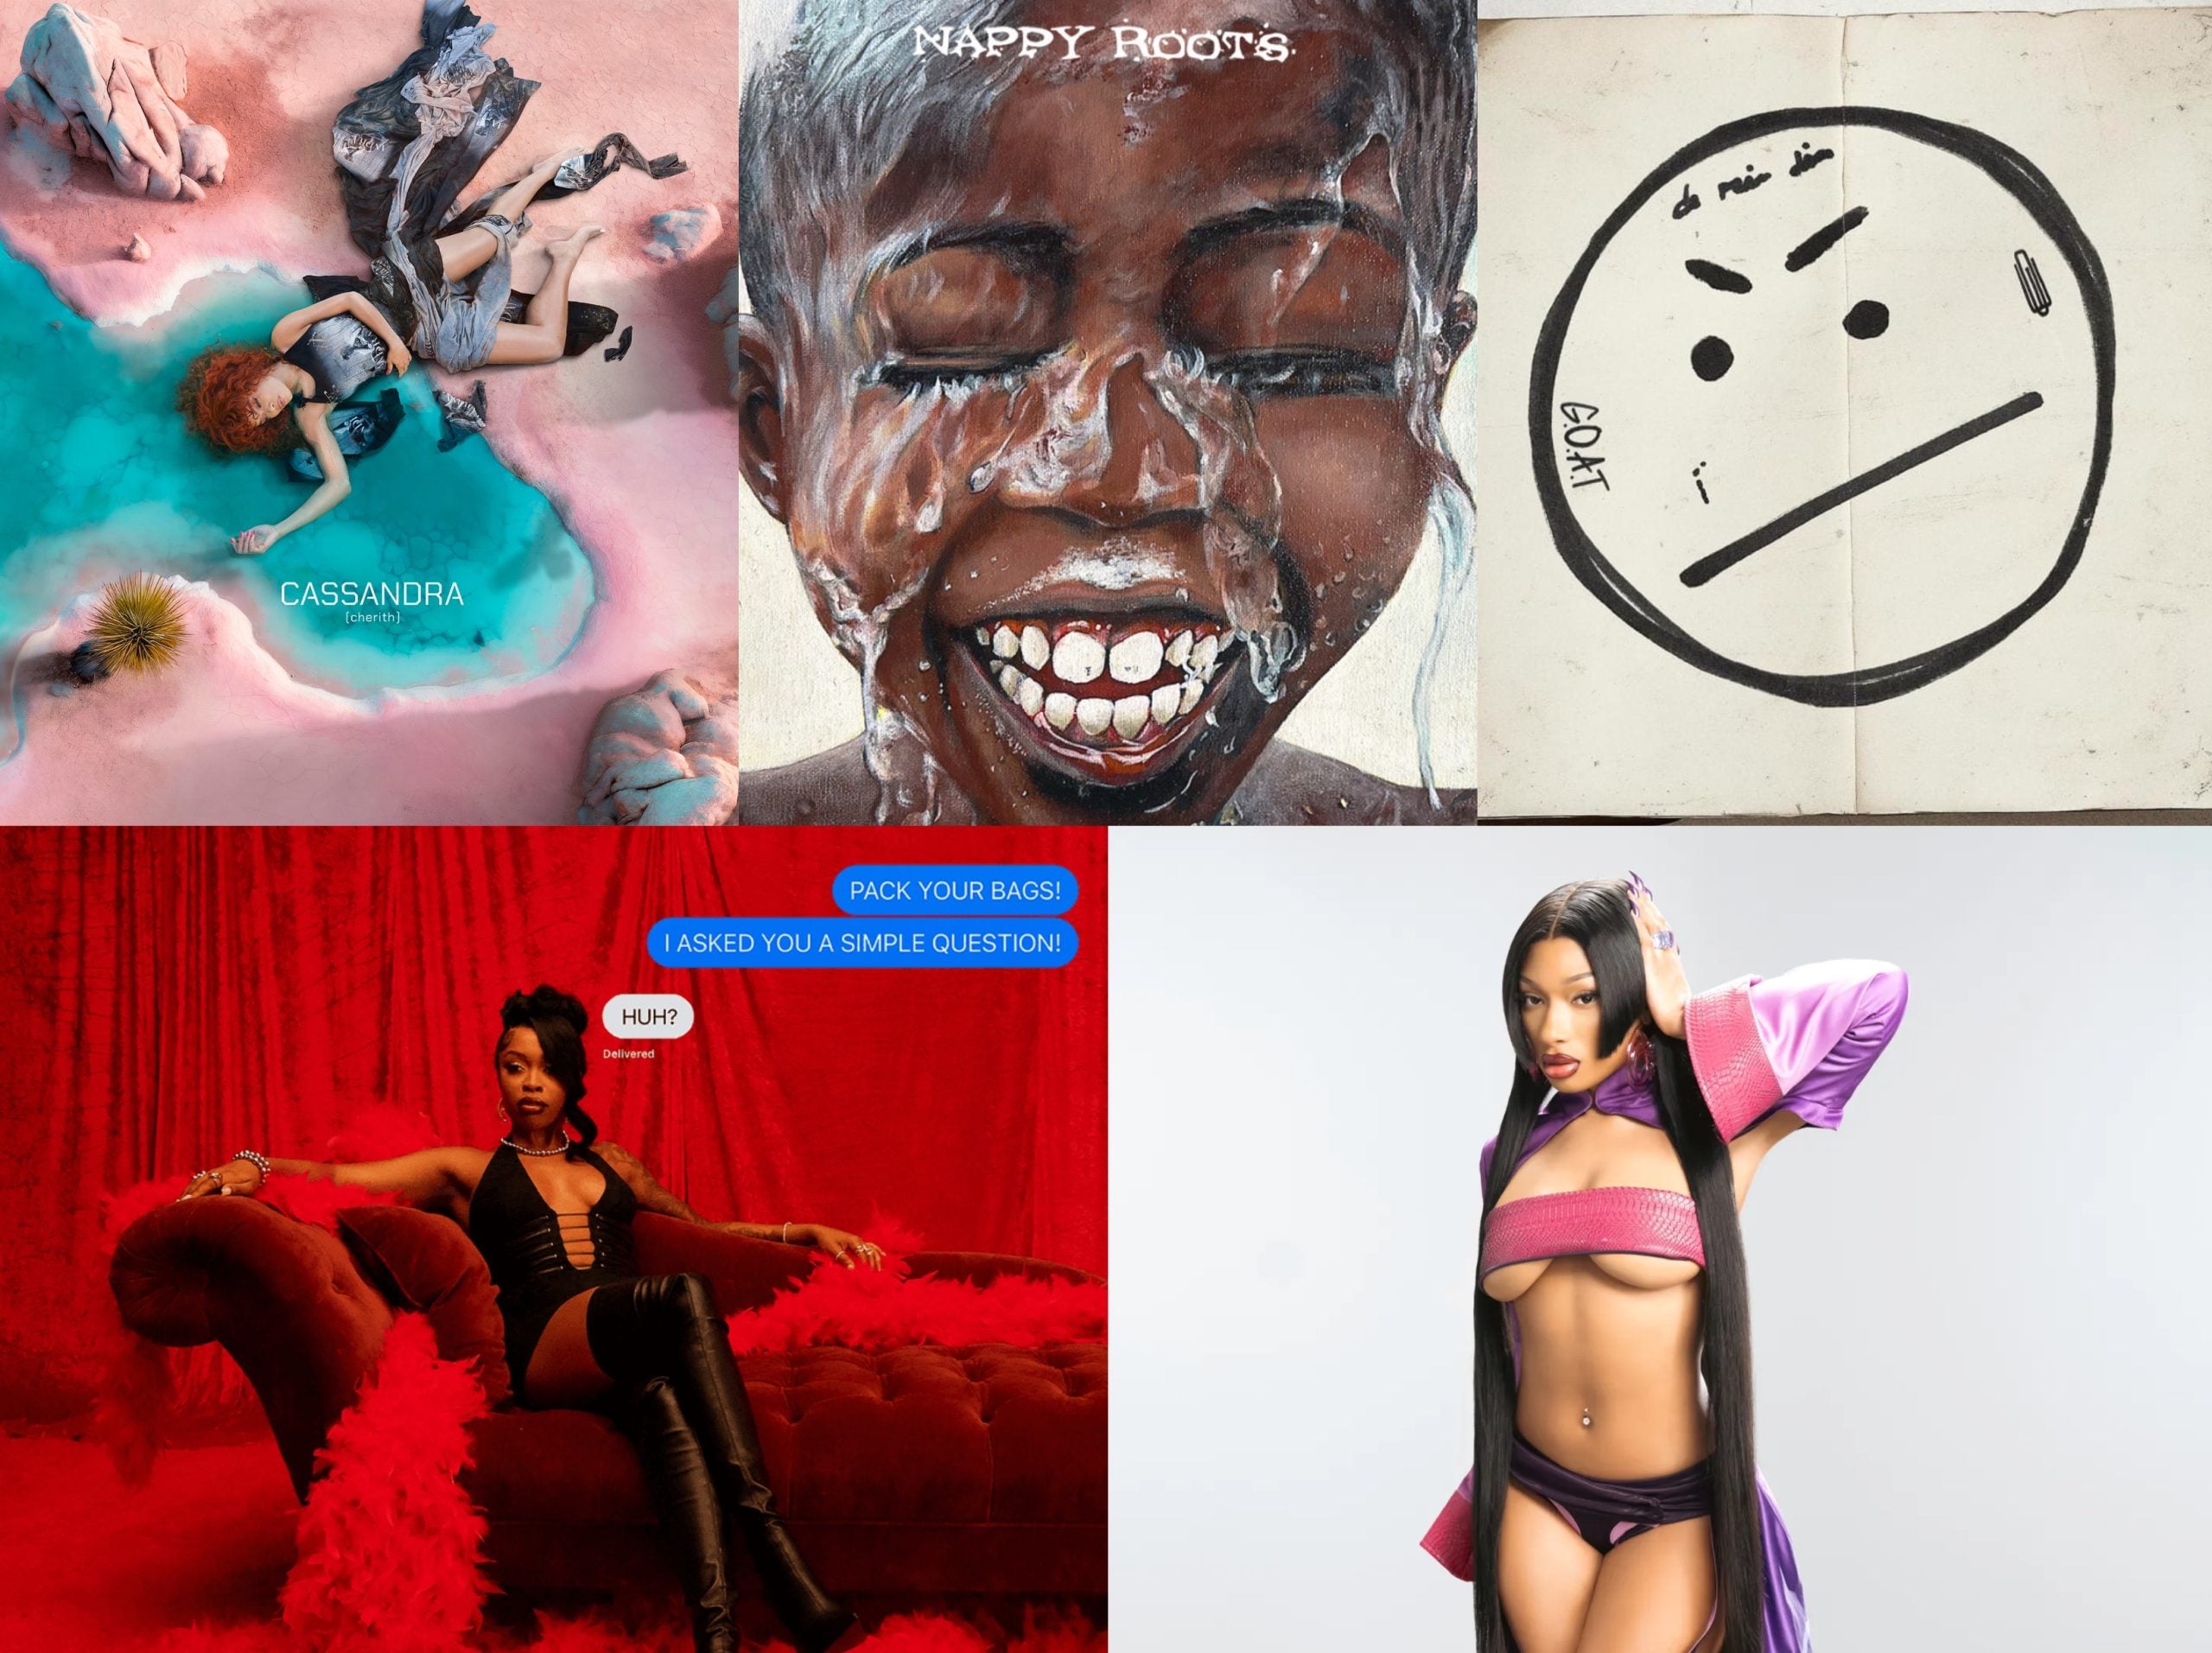 Best New Music This Week: Megan Thee Stallion, Coi Leray, Tink And More